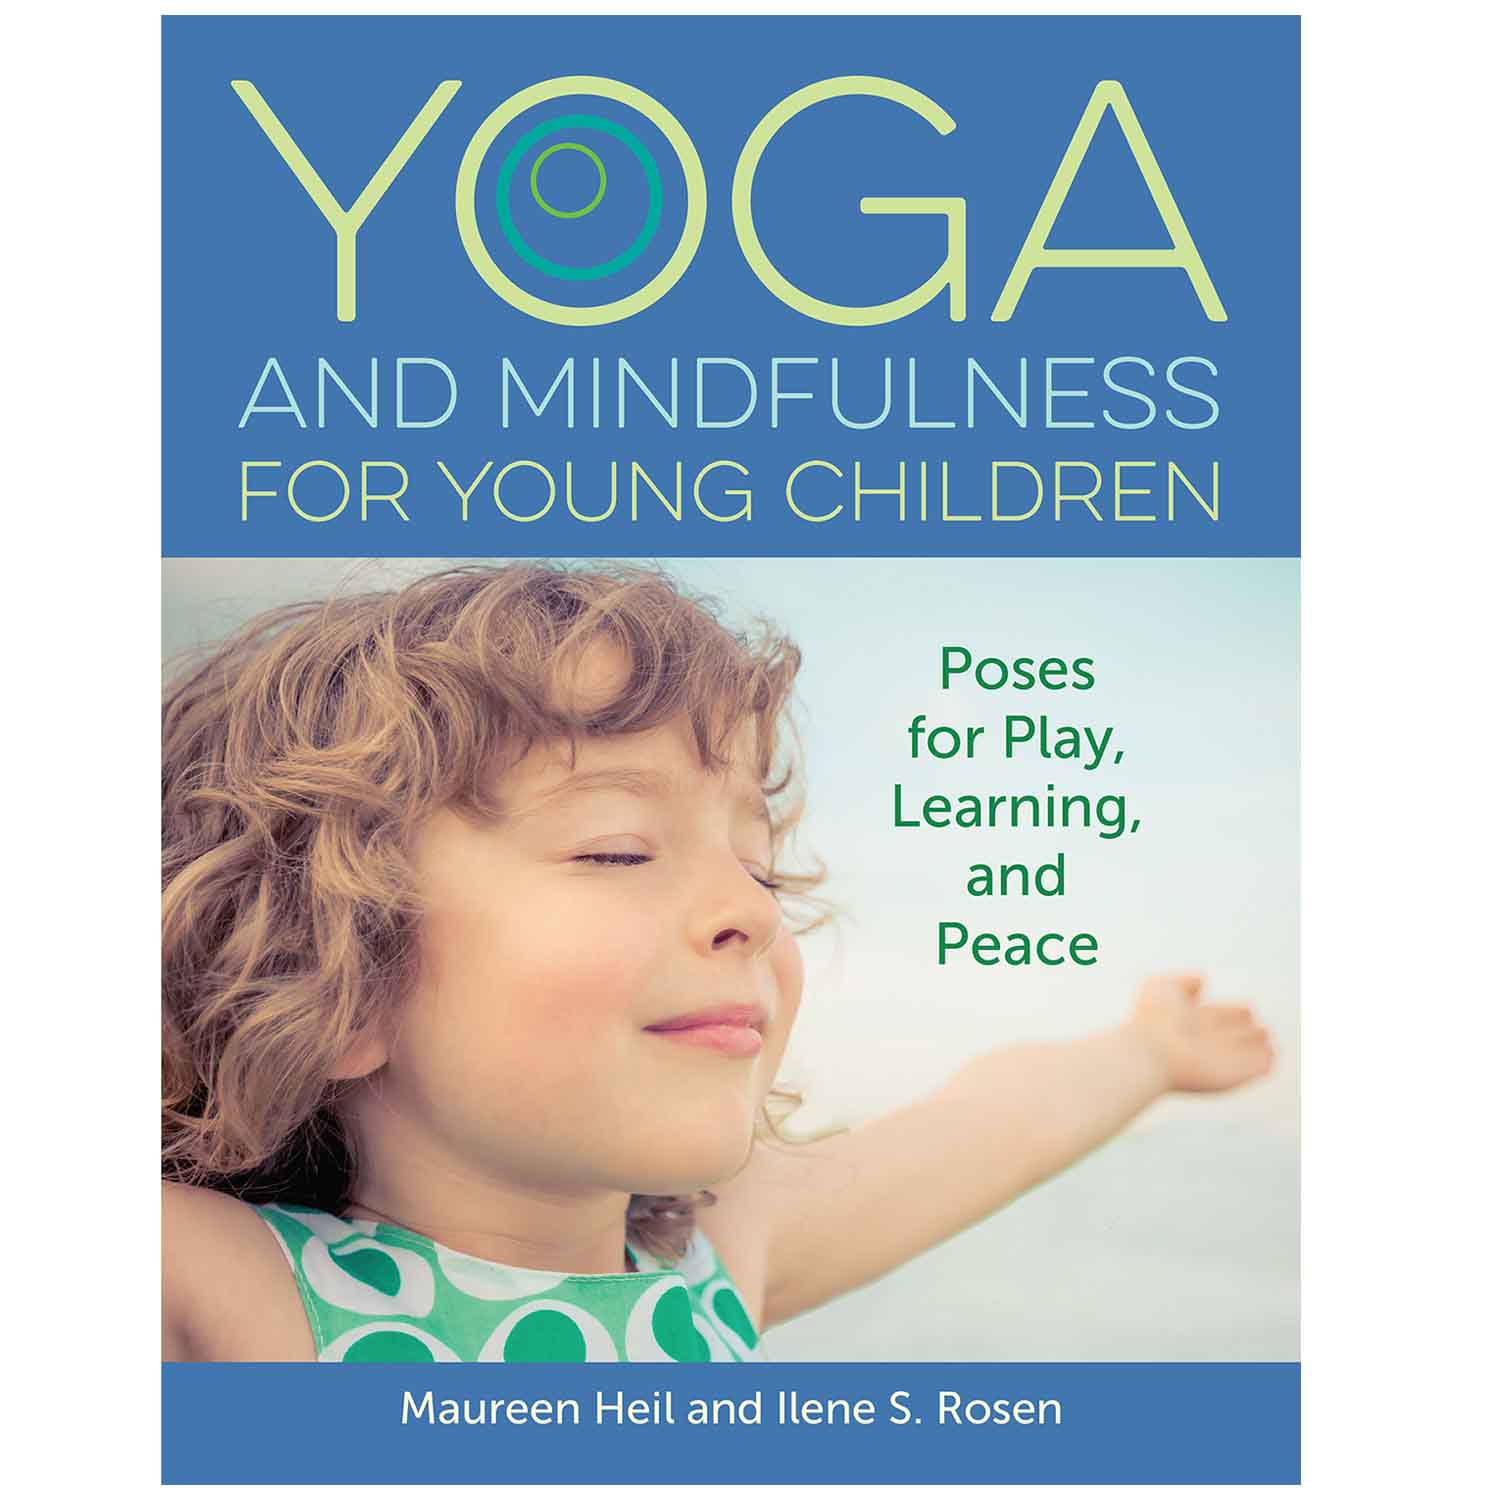 Yoga and Mindfulness for Young Children: Poses for Play, Learning, and Peace